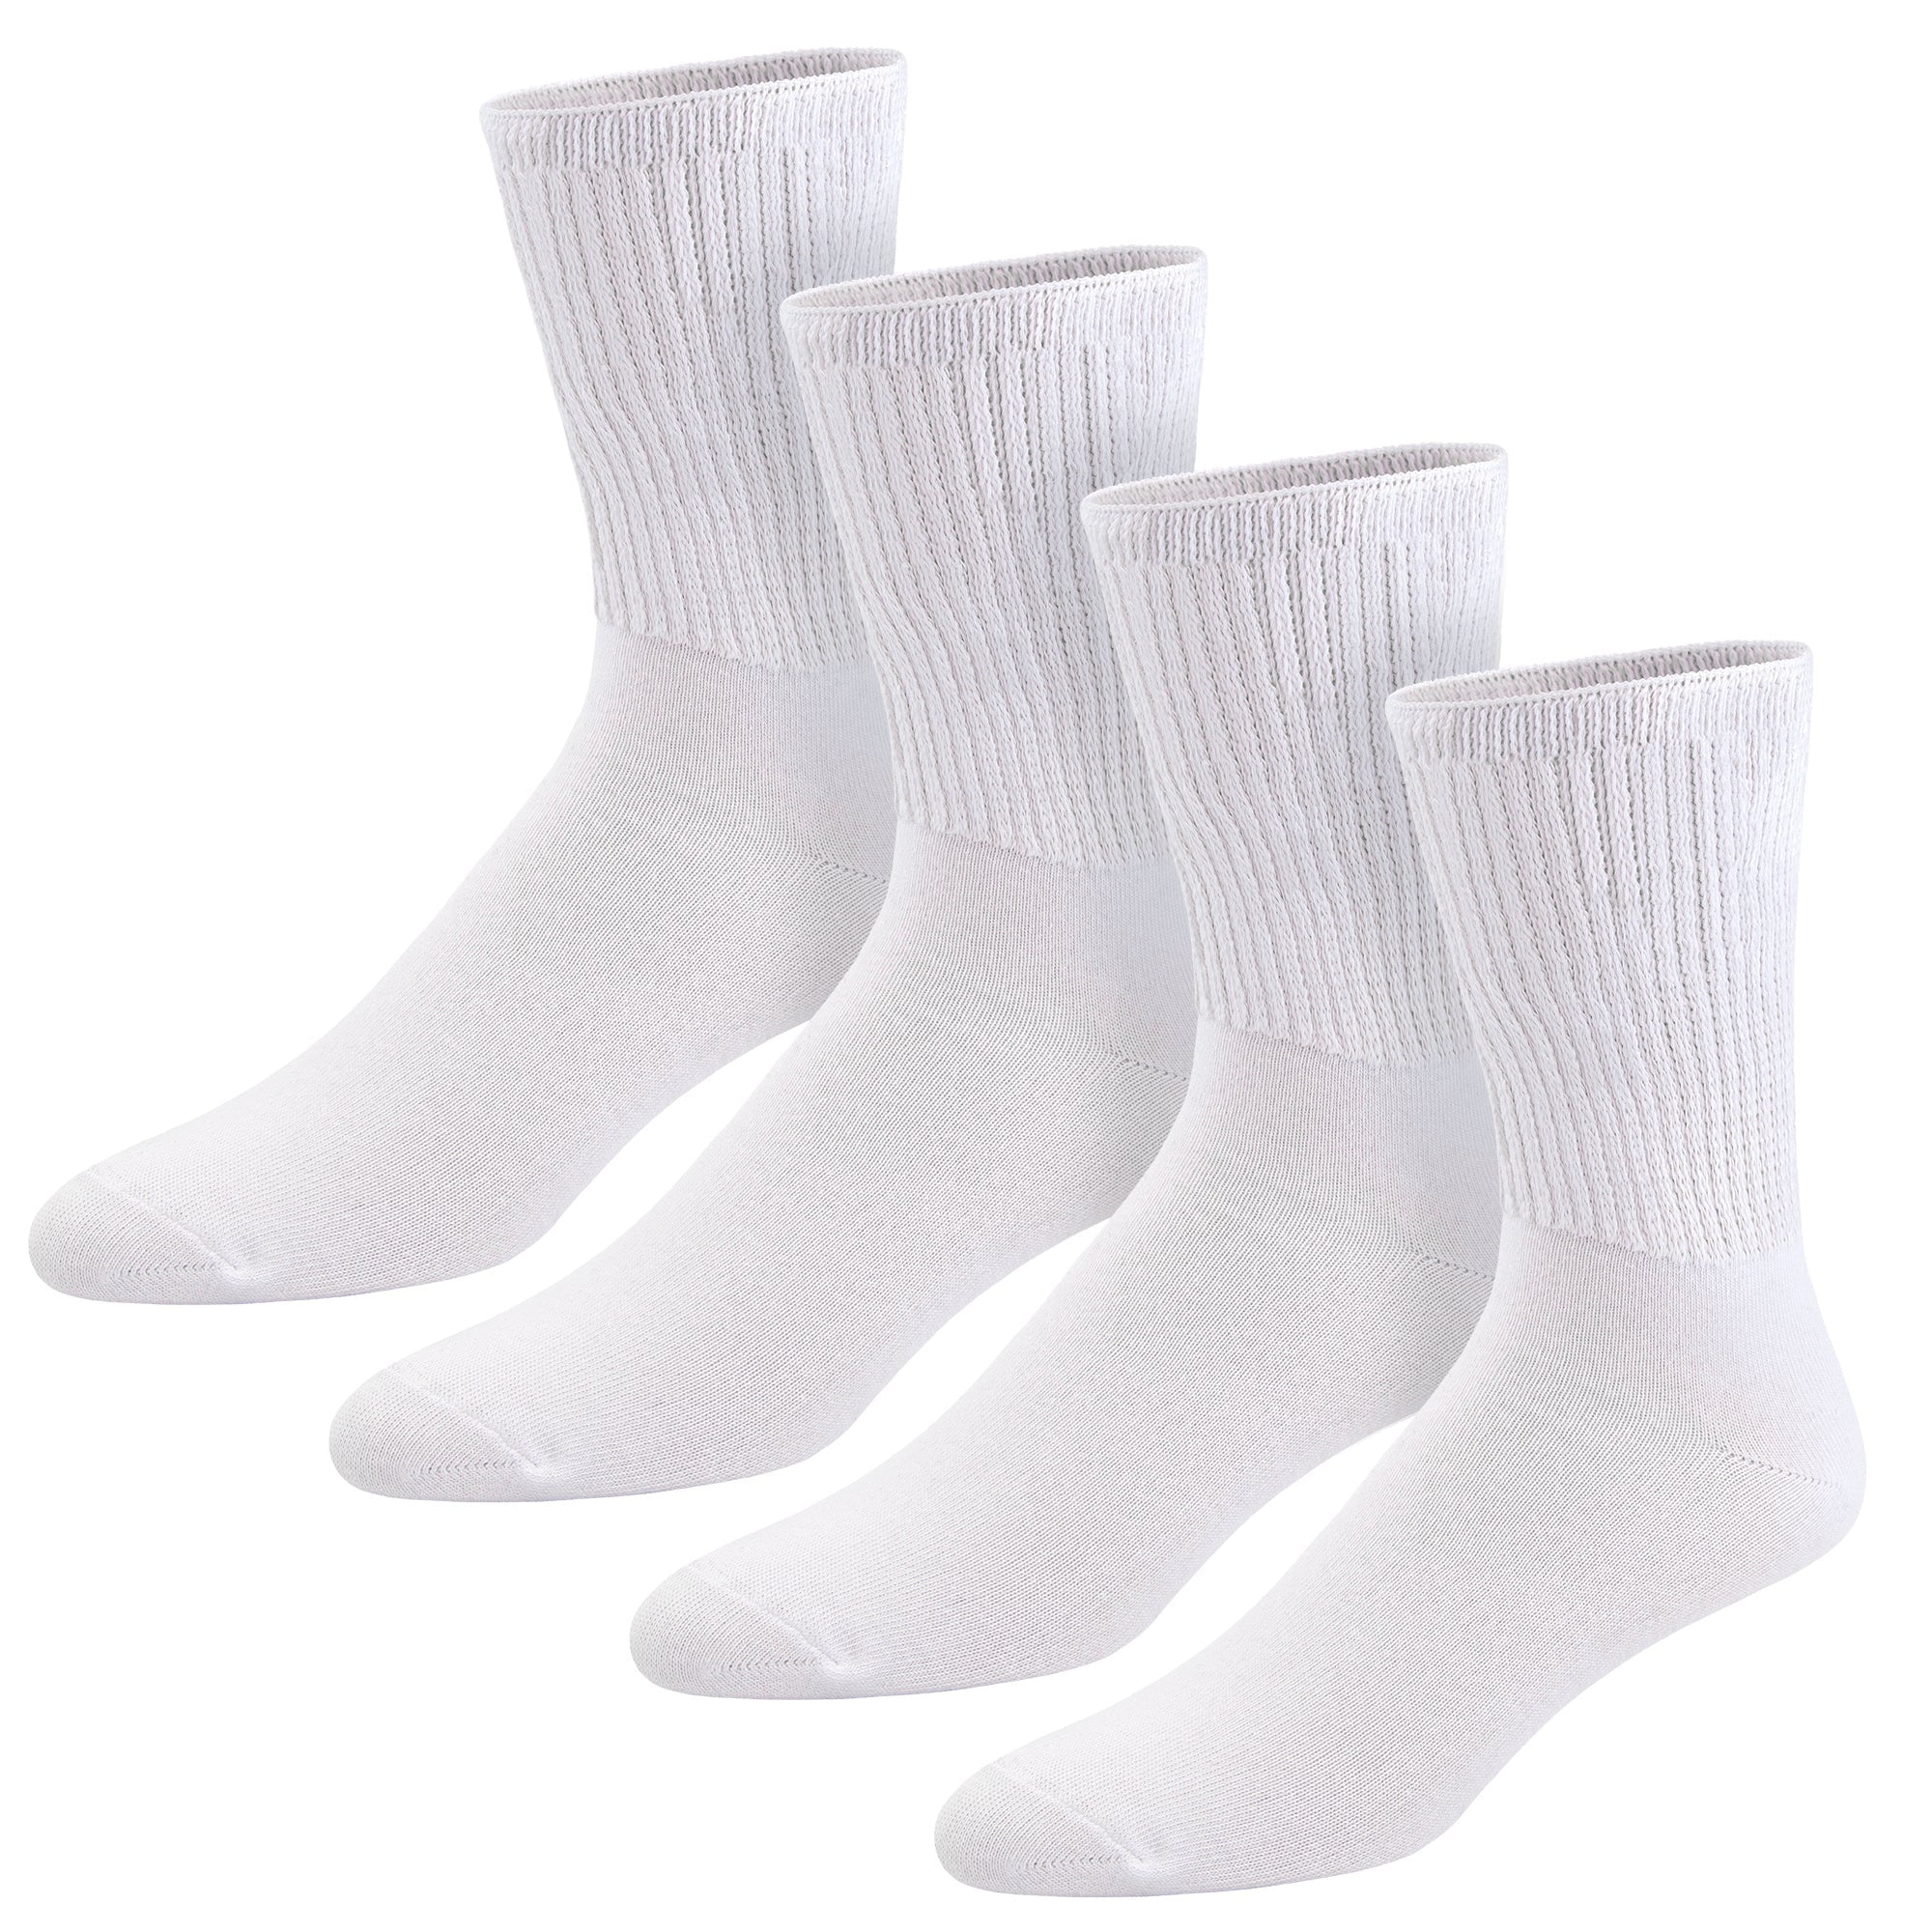 4 pairs of Thin Combed Cotton Diabetic Socks for Men & Women, Loose ...